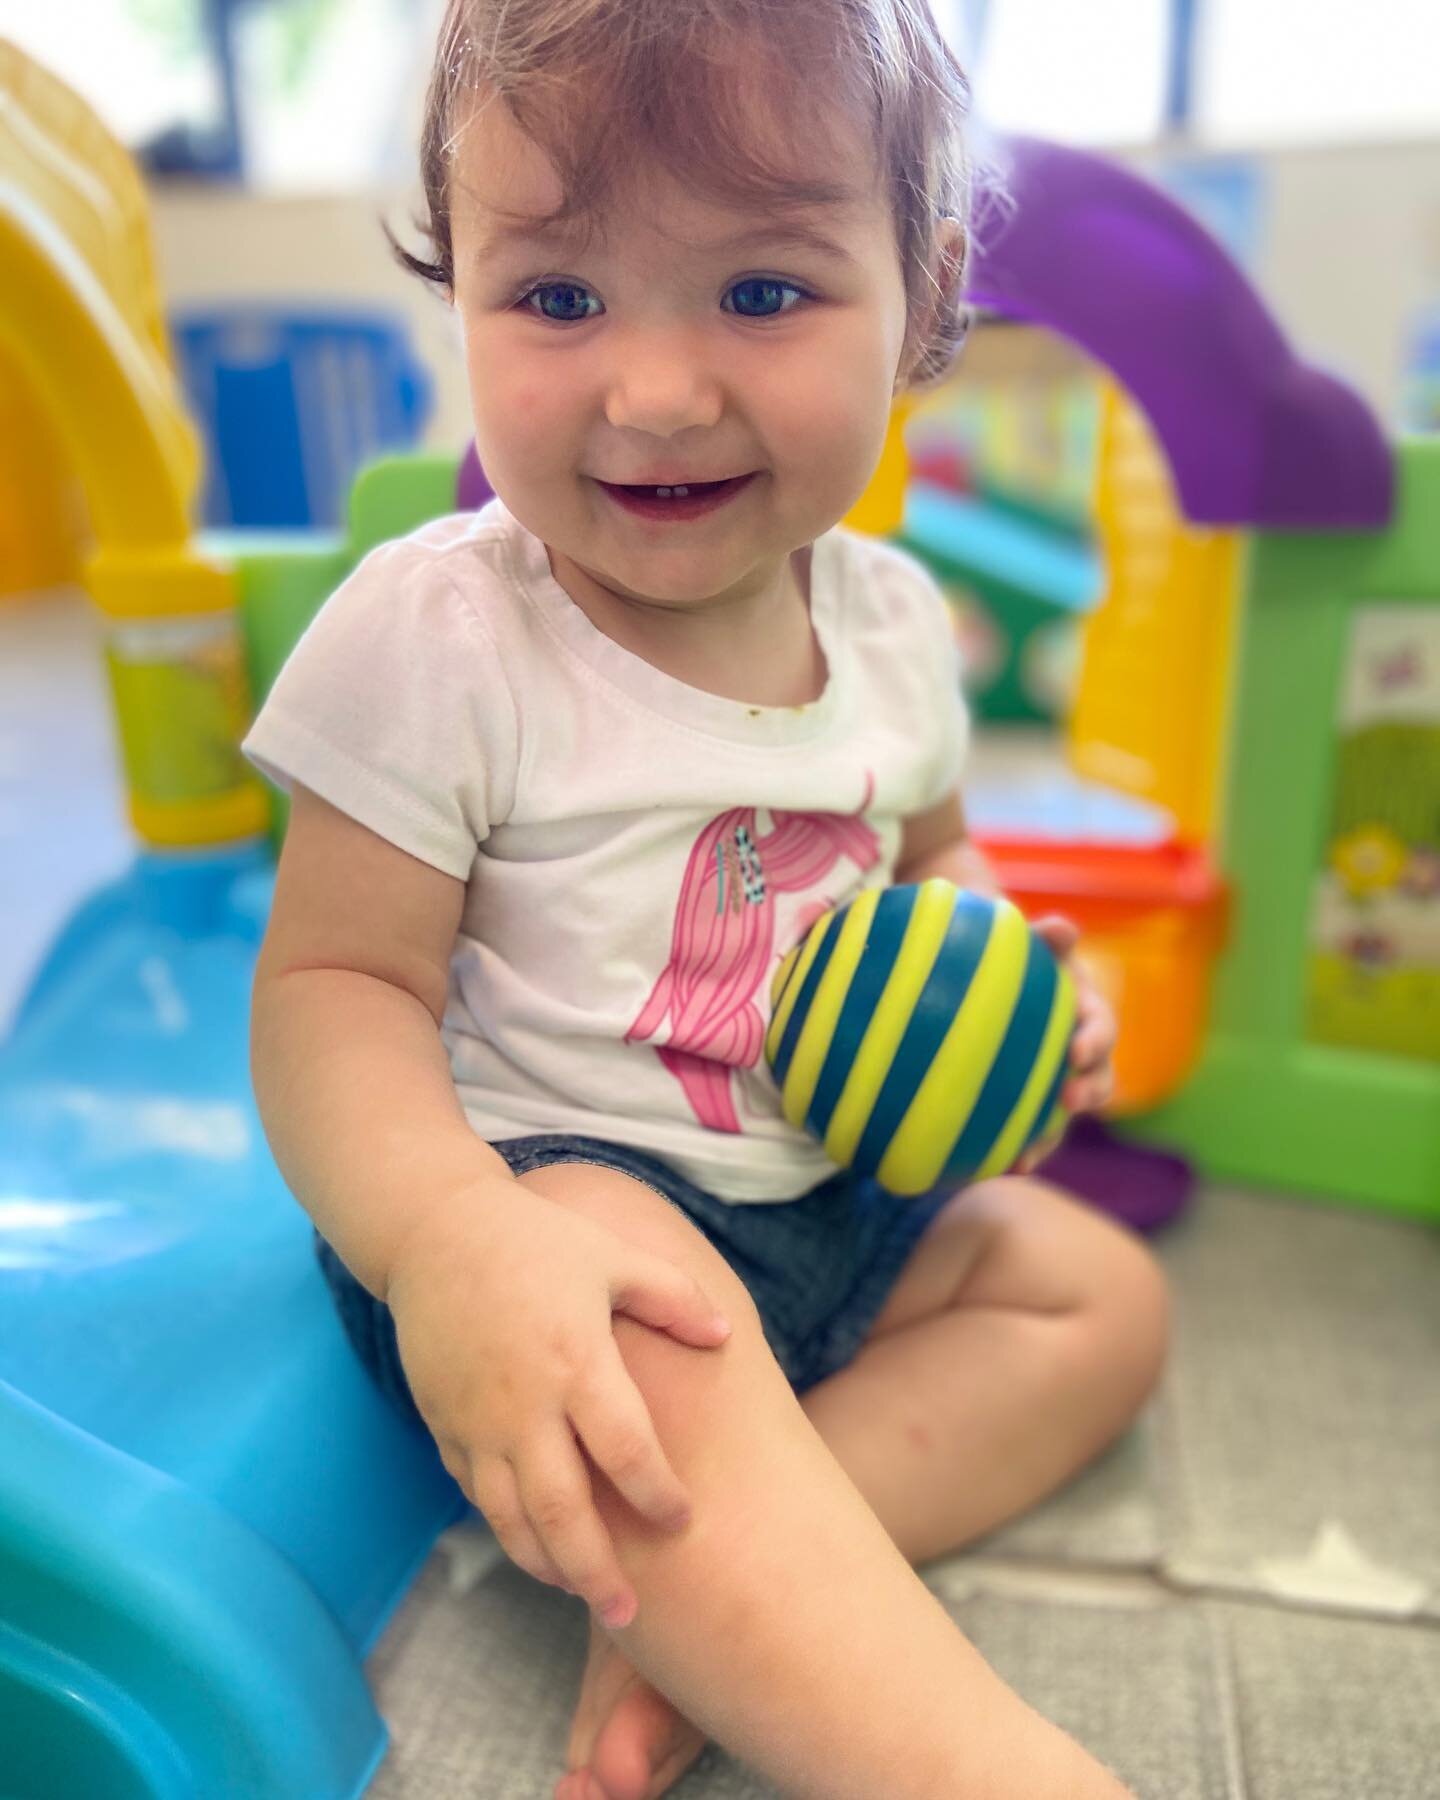 Happy Wednesday from our infants &amp; toddlers ❤️
.
.
#betshira #betshiracongregation #buildingcommunity #miami #pinecrest #palmettobay #coralgables #cutlerbay #kendall #youngfamilies #preschool #ecc #betshiraecc #school #kids #children #families #j